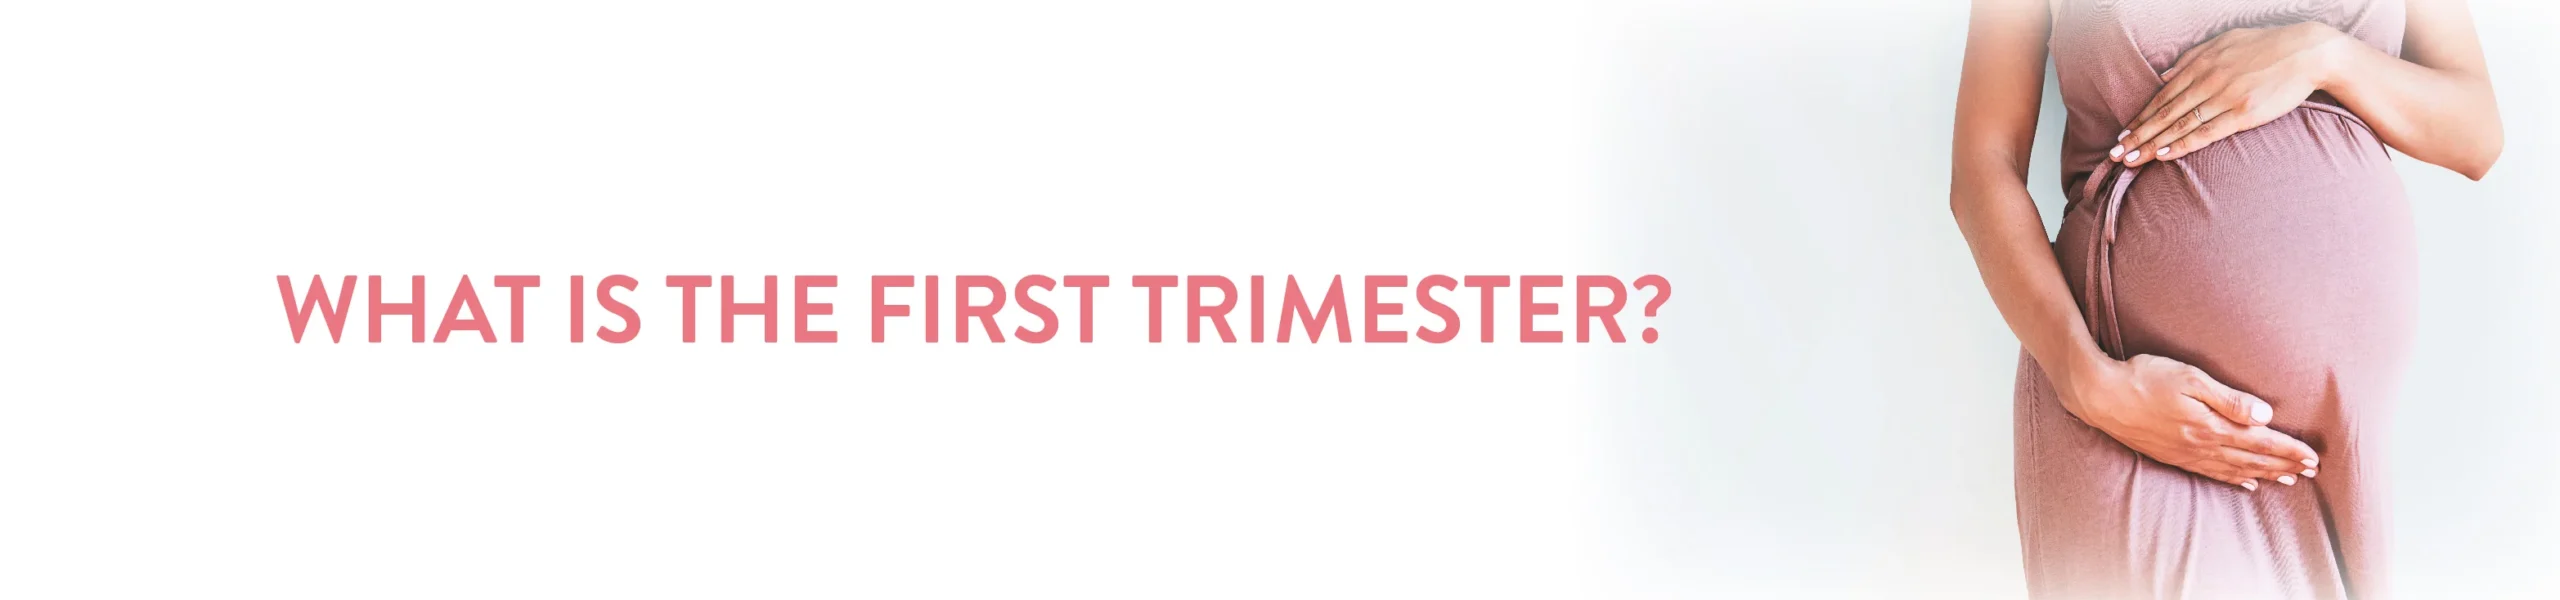 What is the first trimester